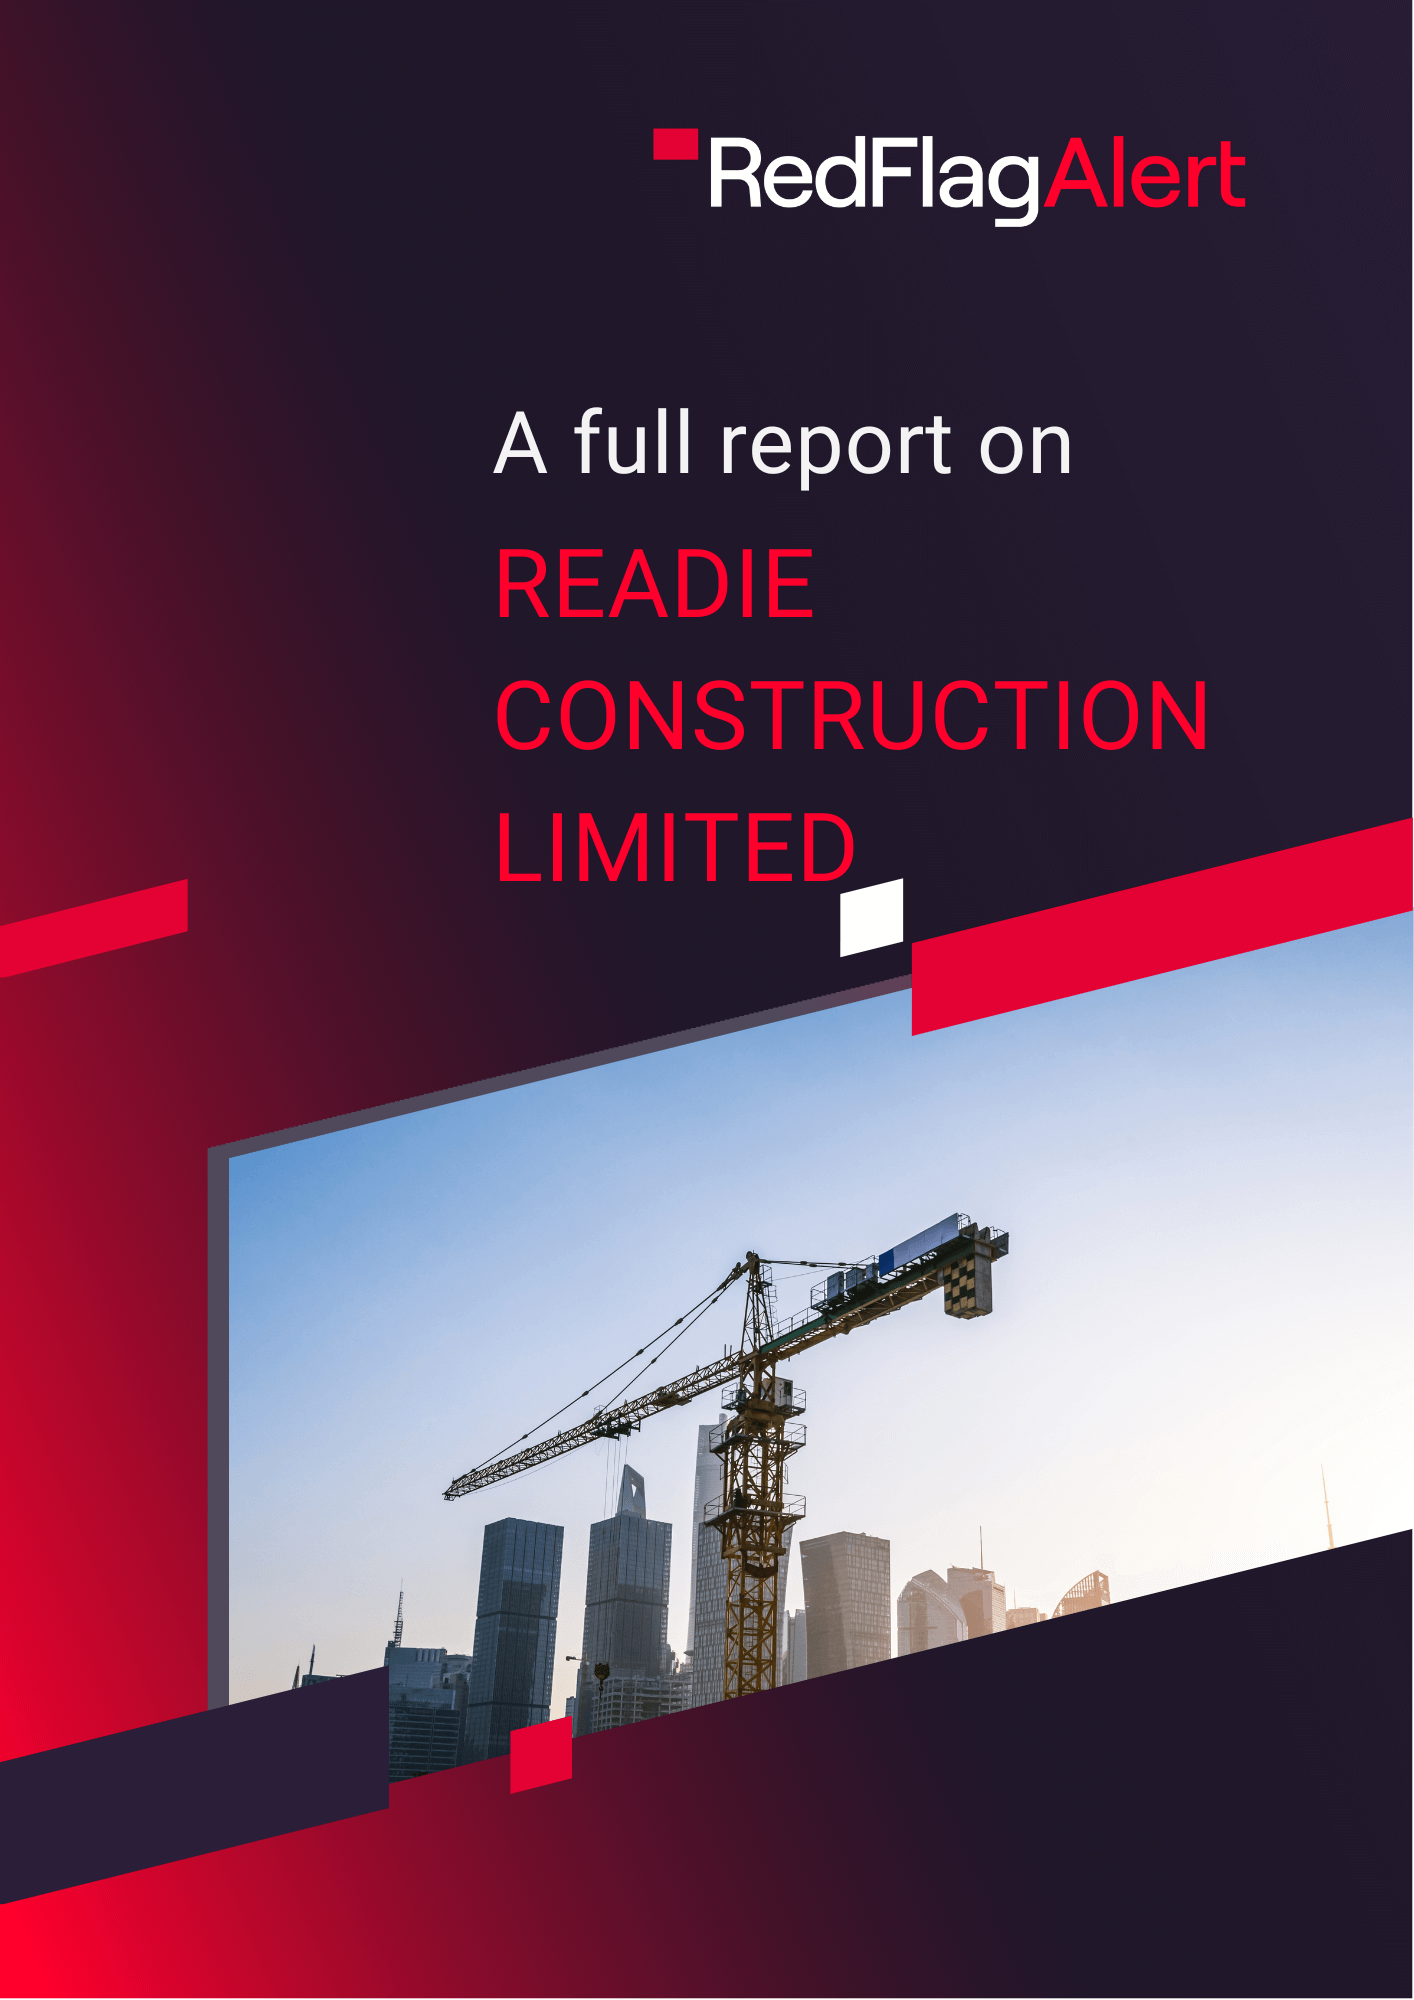 READIE CONSTRUCTION LIMITED (1)